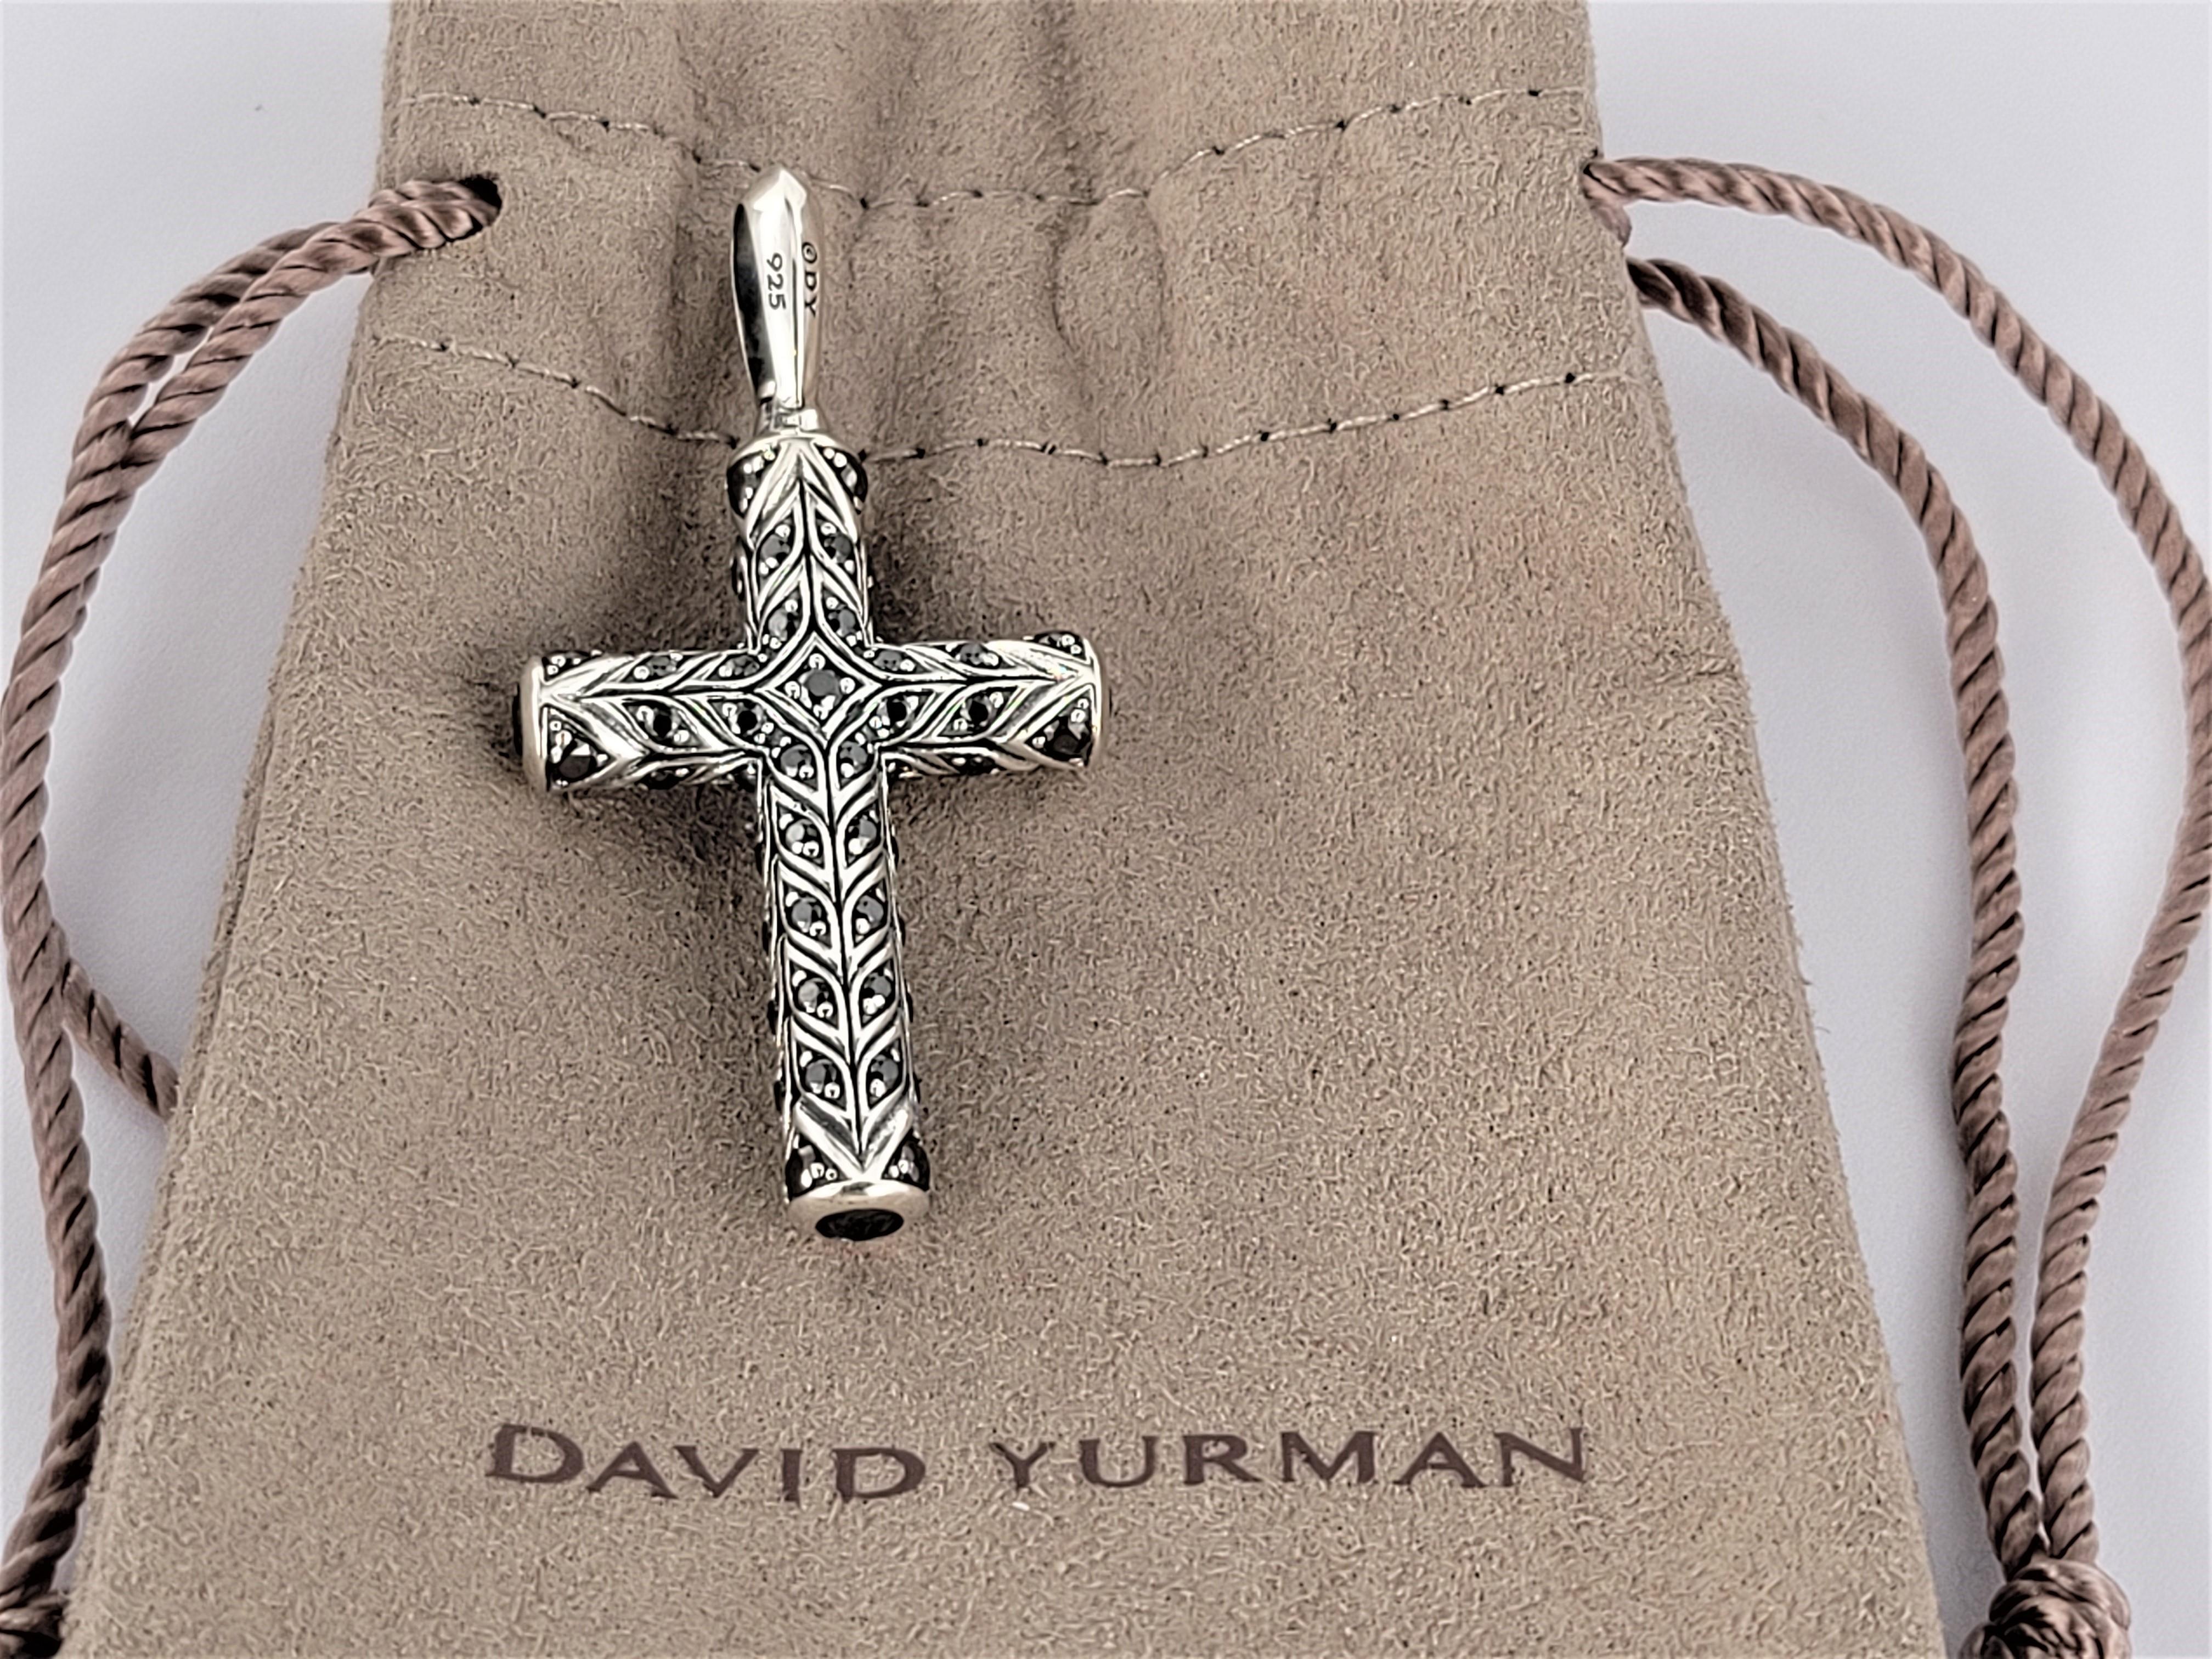 Brand David Yurman
Chevron Collection for Men
Pave Set black diamonds 1.80 total carat weight 
Material Sterling Silver 
metal Purity 925
Cross Length with Bail 45 X 23.7mm
Cross Weight 10.7gr 
Condition new, never worn
Comes with David Yurman